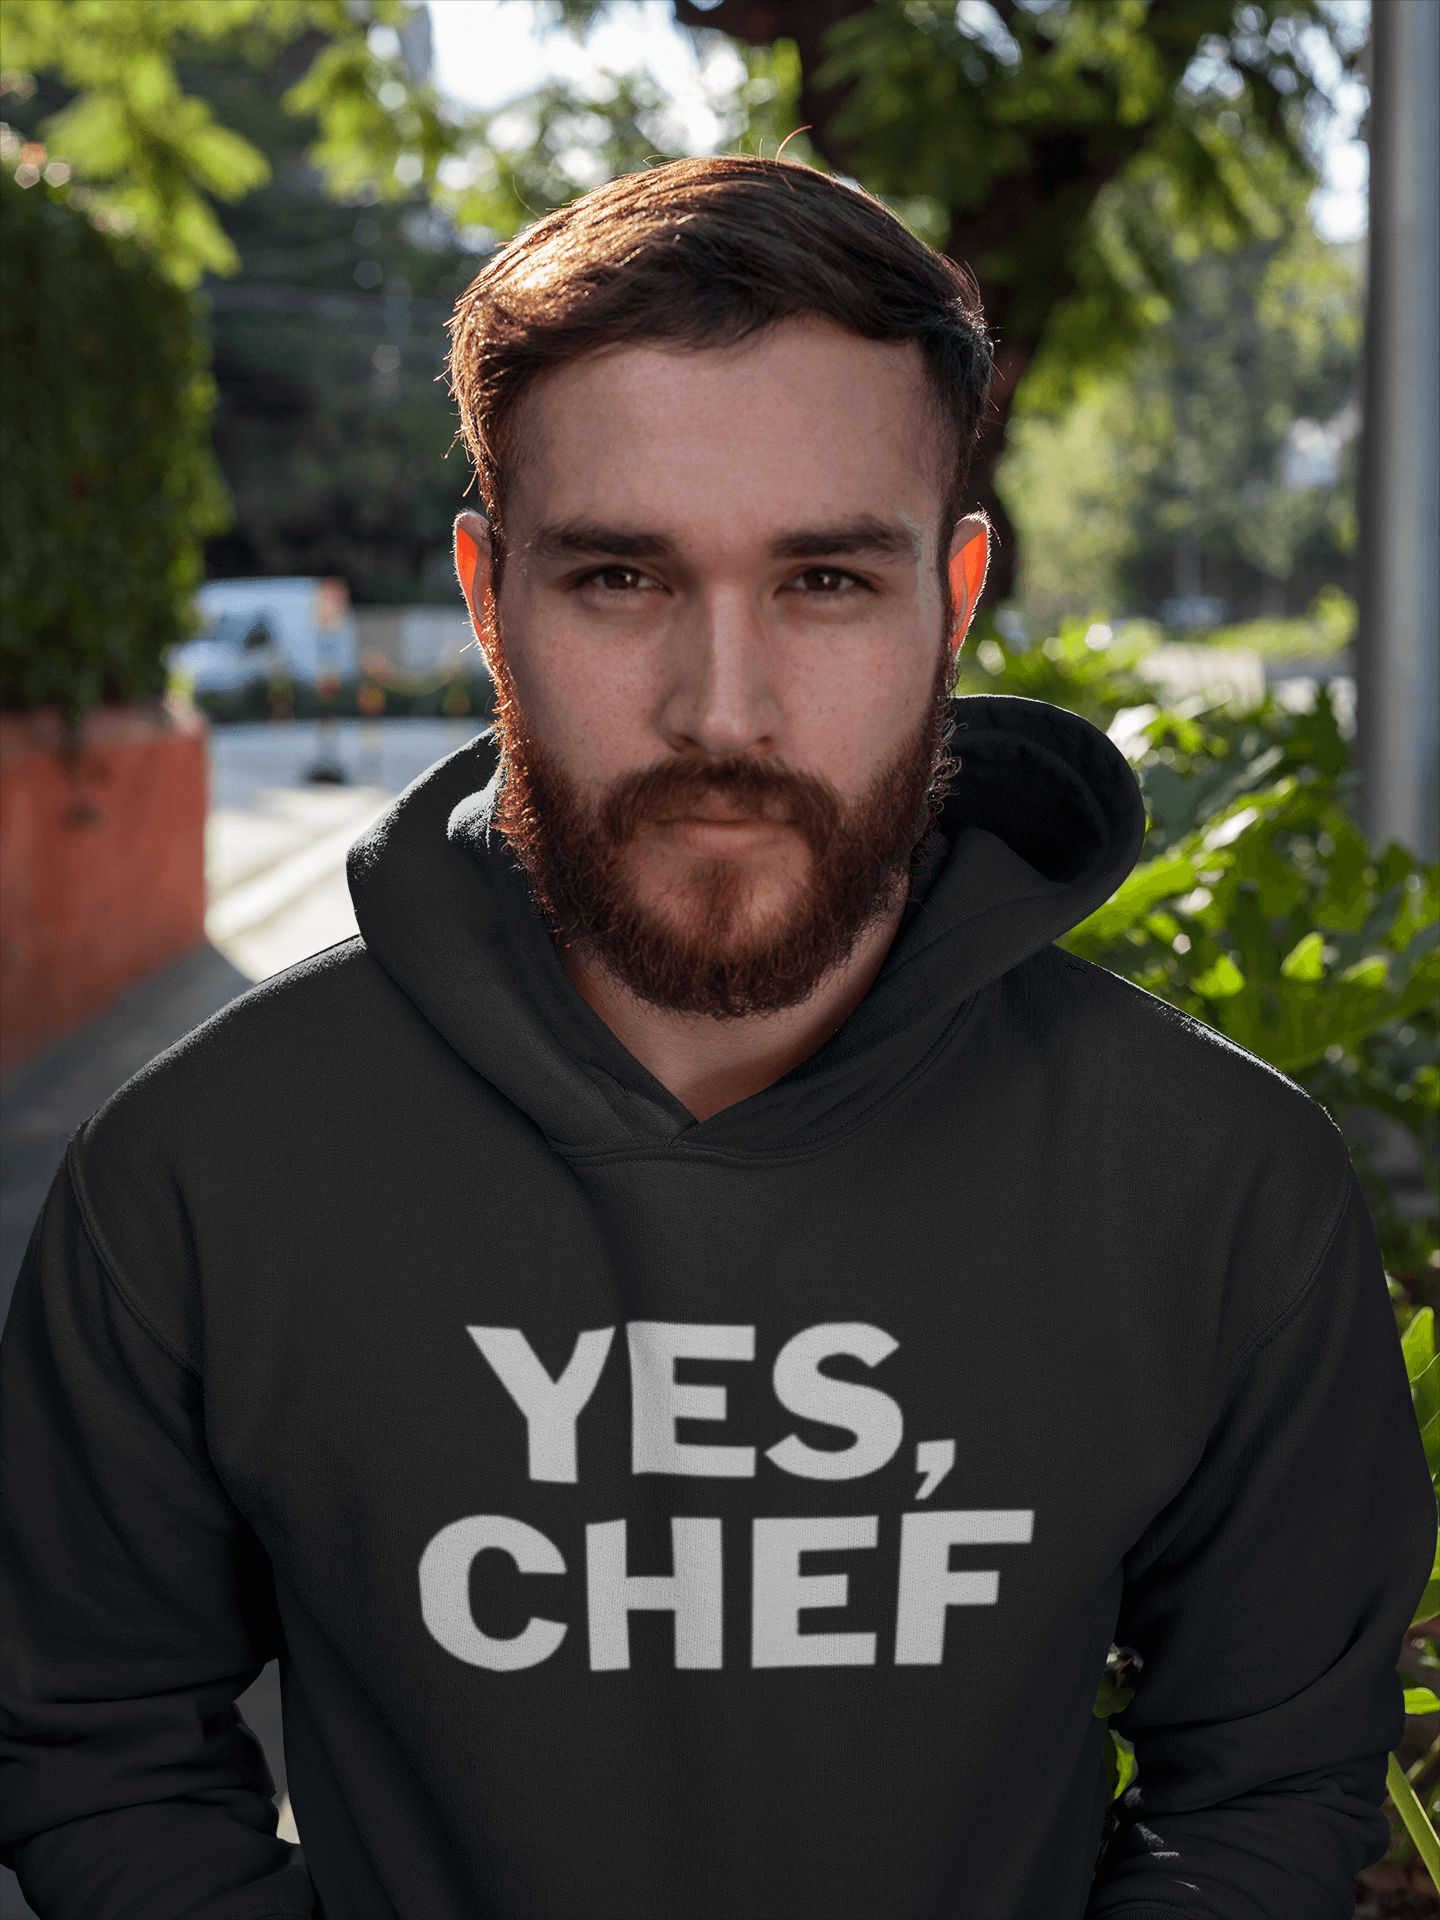 Blended Cotton Hoodie Yes, Chef Midweight Ultra Soft Unisex Pullover - TopKoalaTee